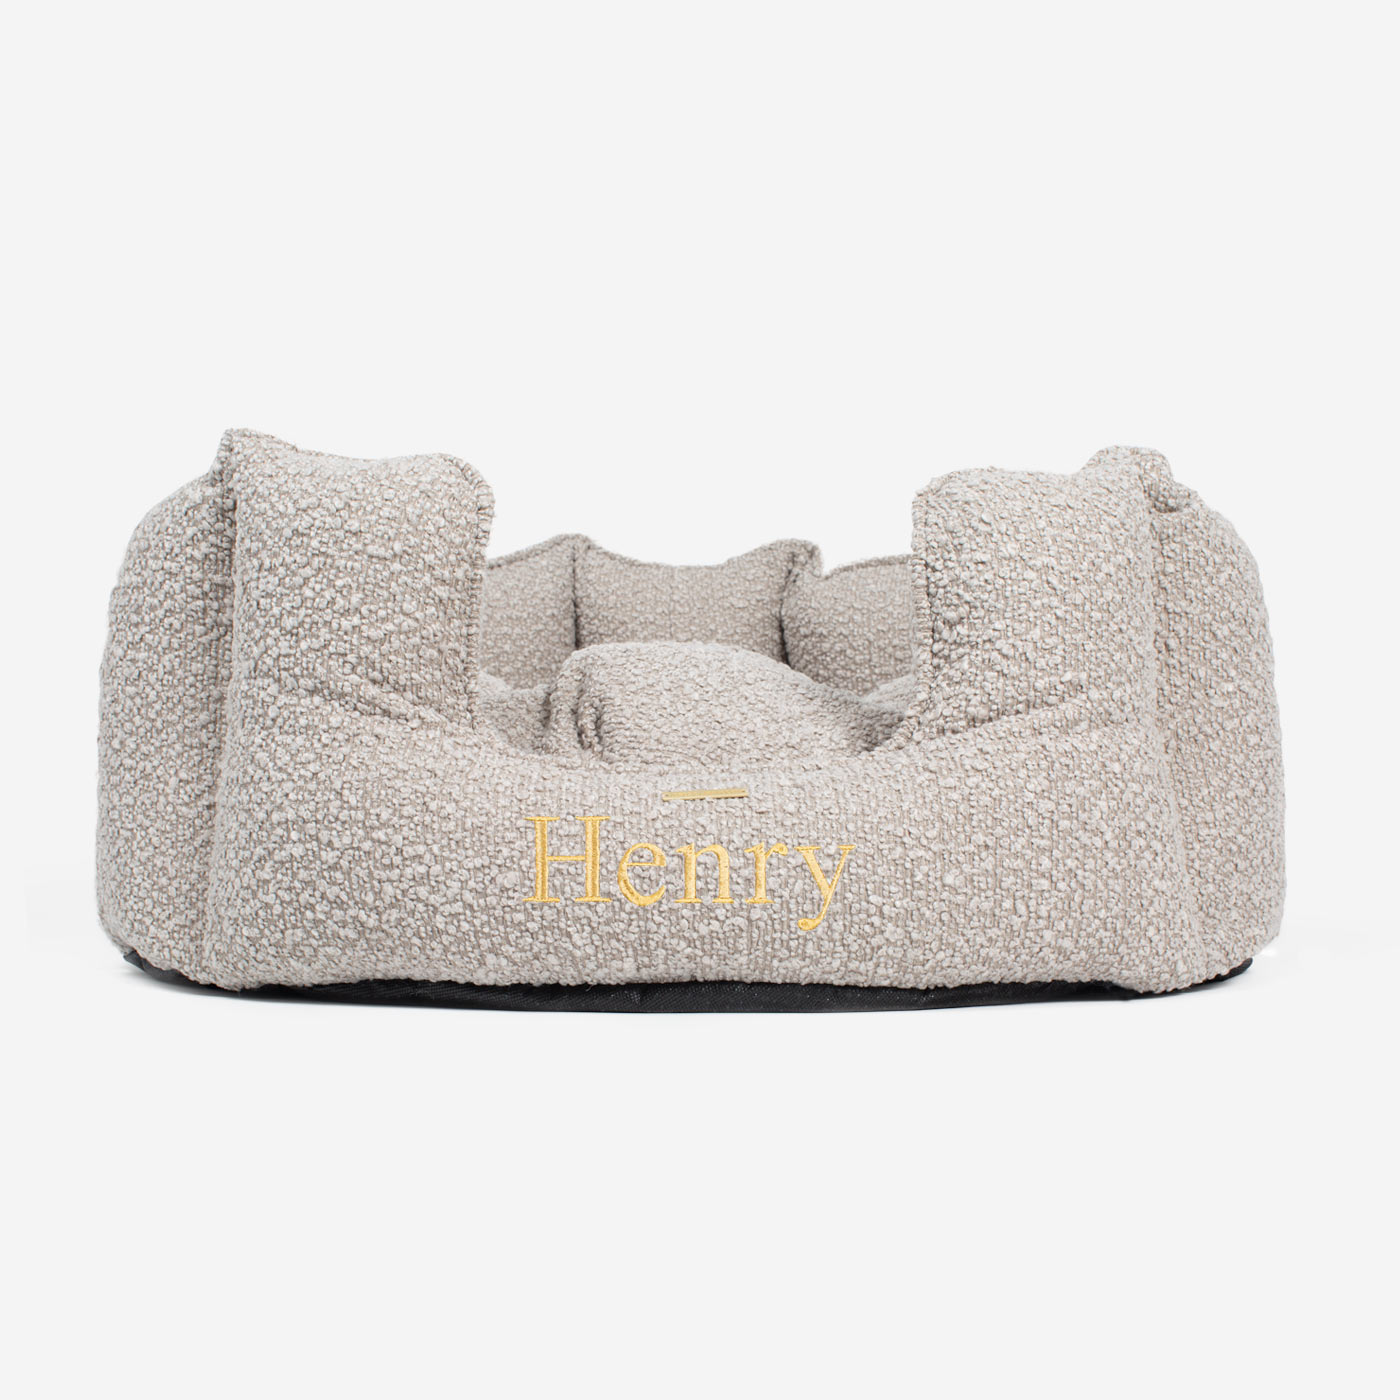 Discover Our Luxurious High Wall Bed For Dogs, Featuring inner pillow with plush teddy fleece on one side To Craft The Perfect Dogs Bed In Stunning Mink Bouclé! Available To Personalise Now at Lords & Labradors    